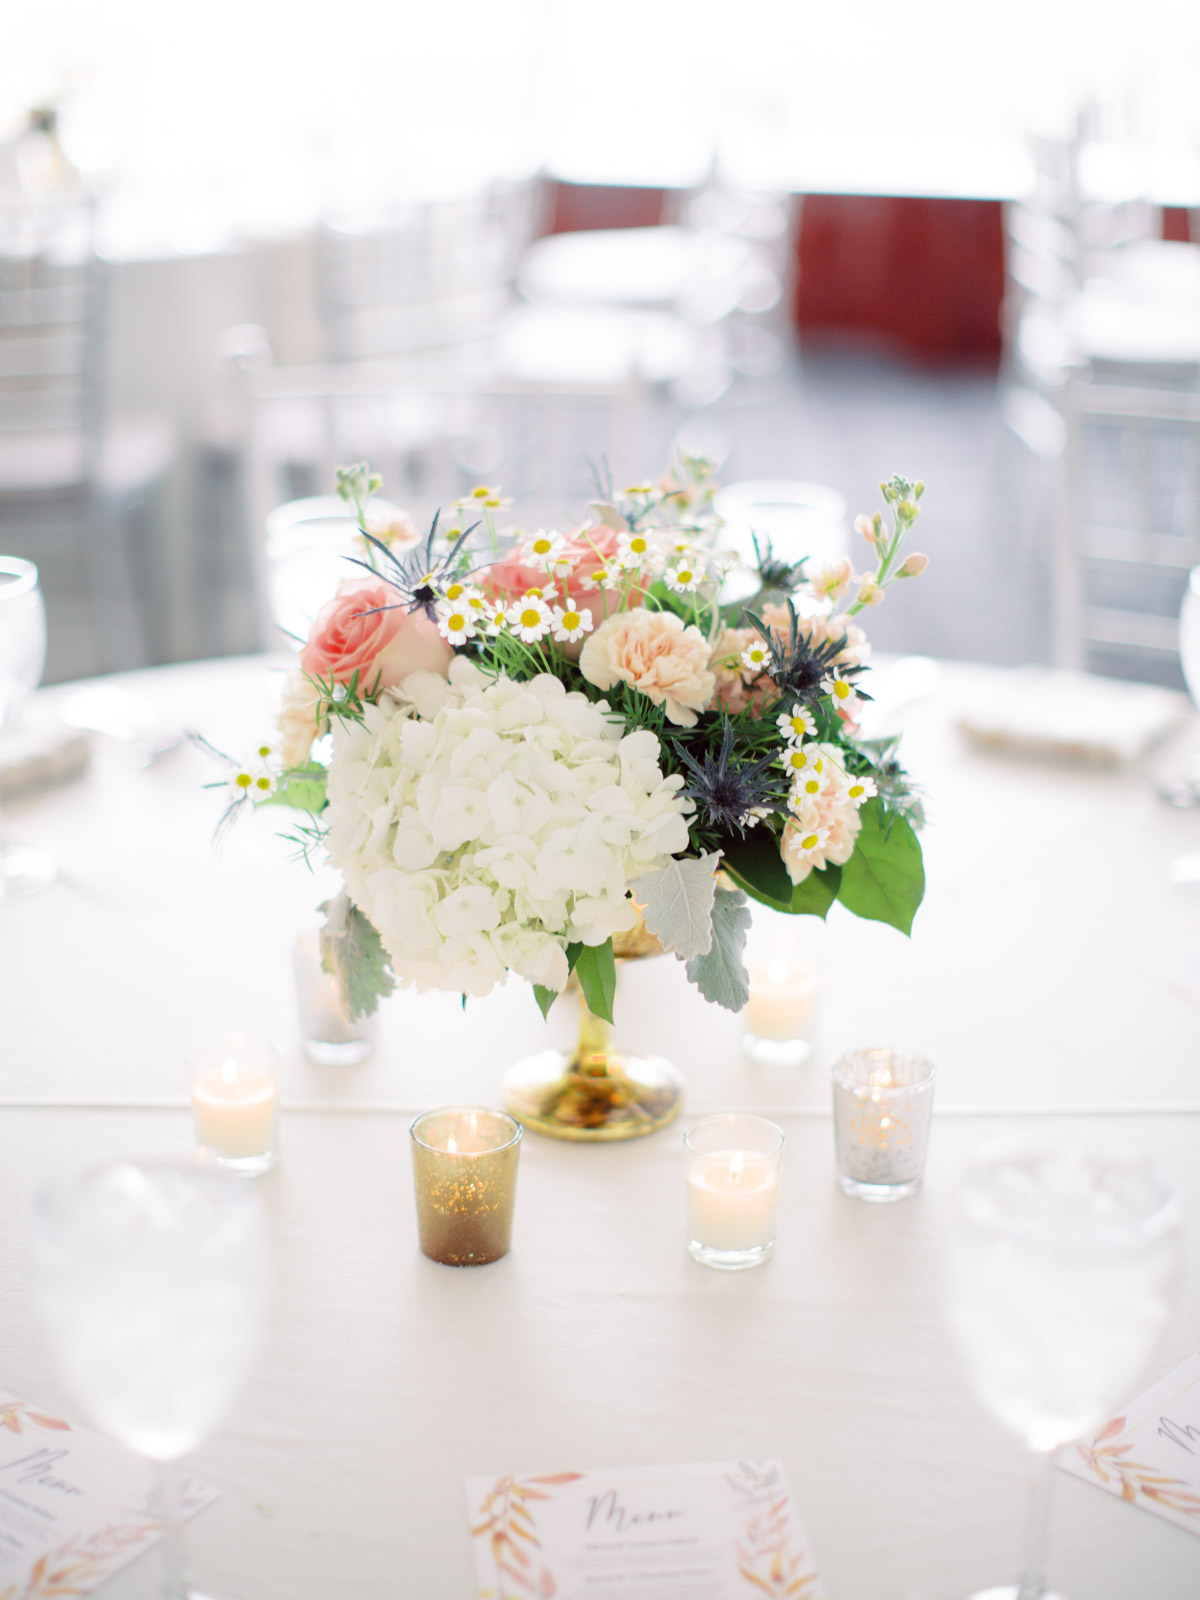 Floral table centerpieces at wedding reception at Top of the Town Arlington